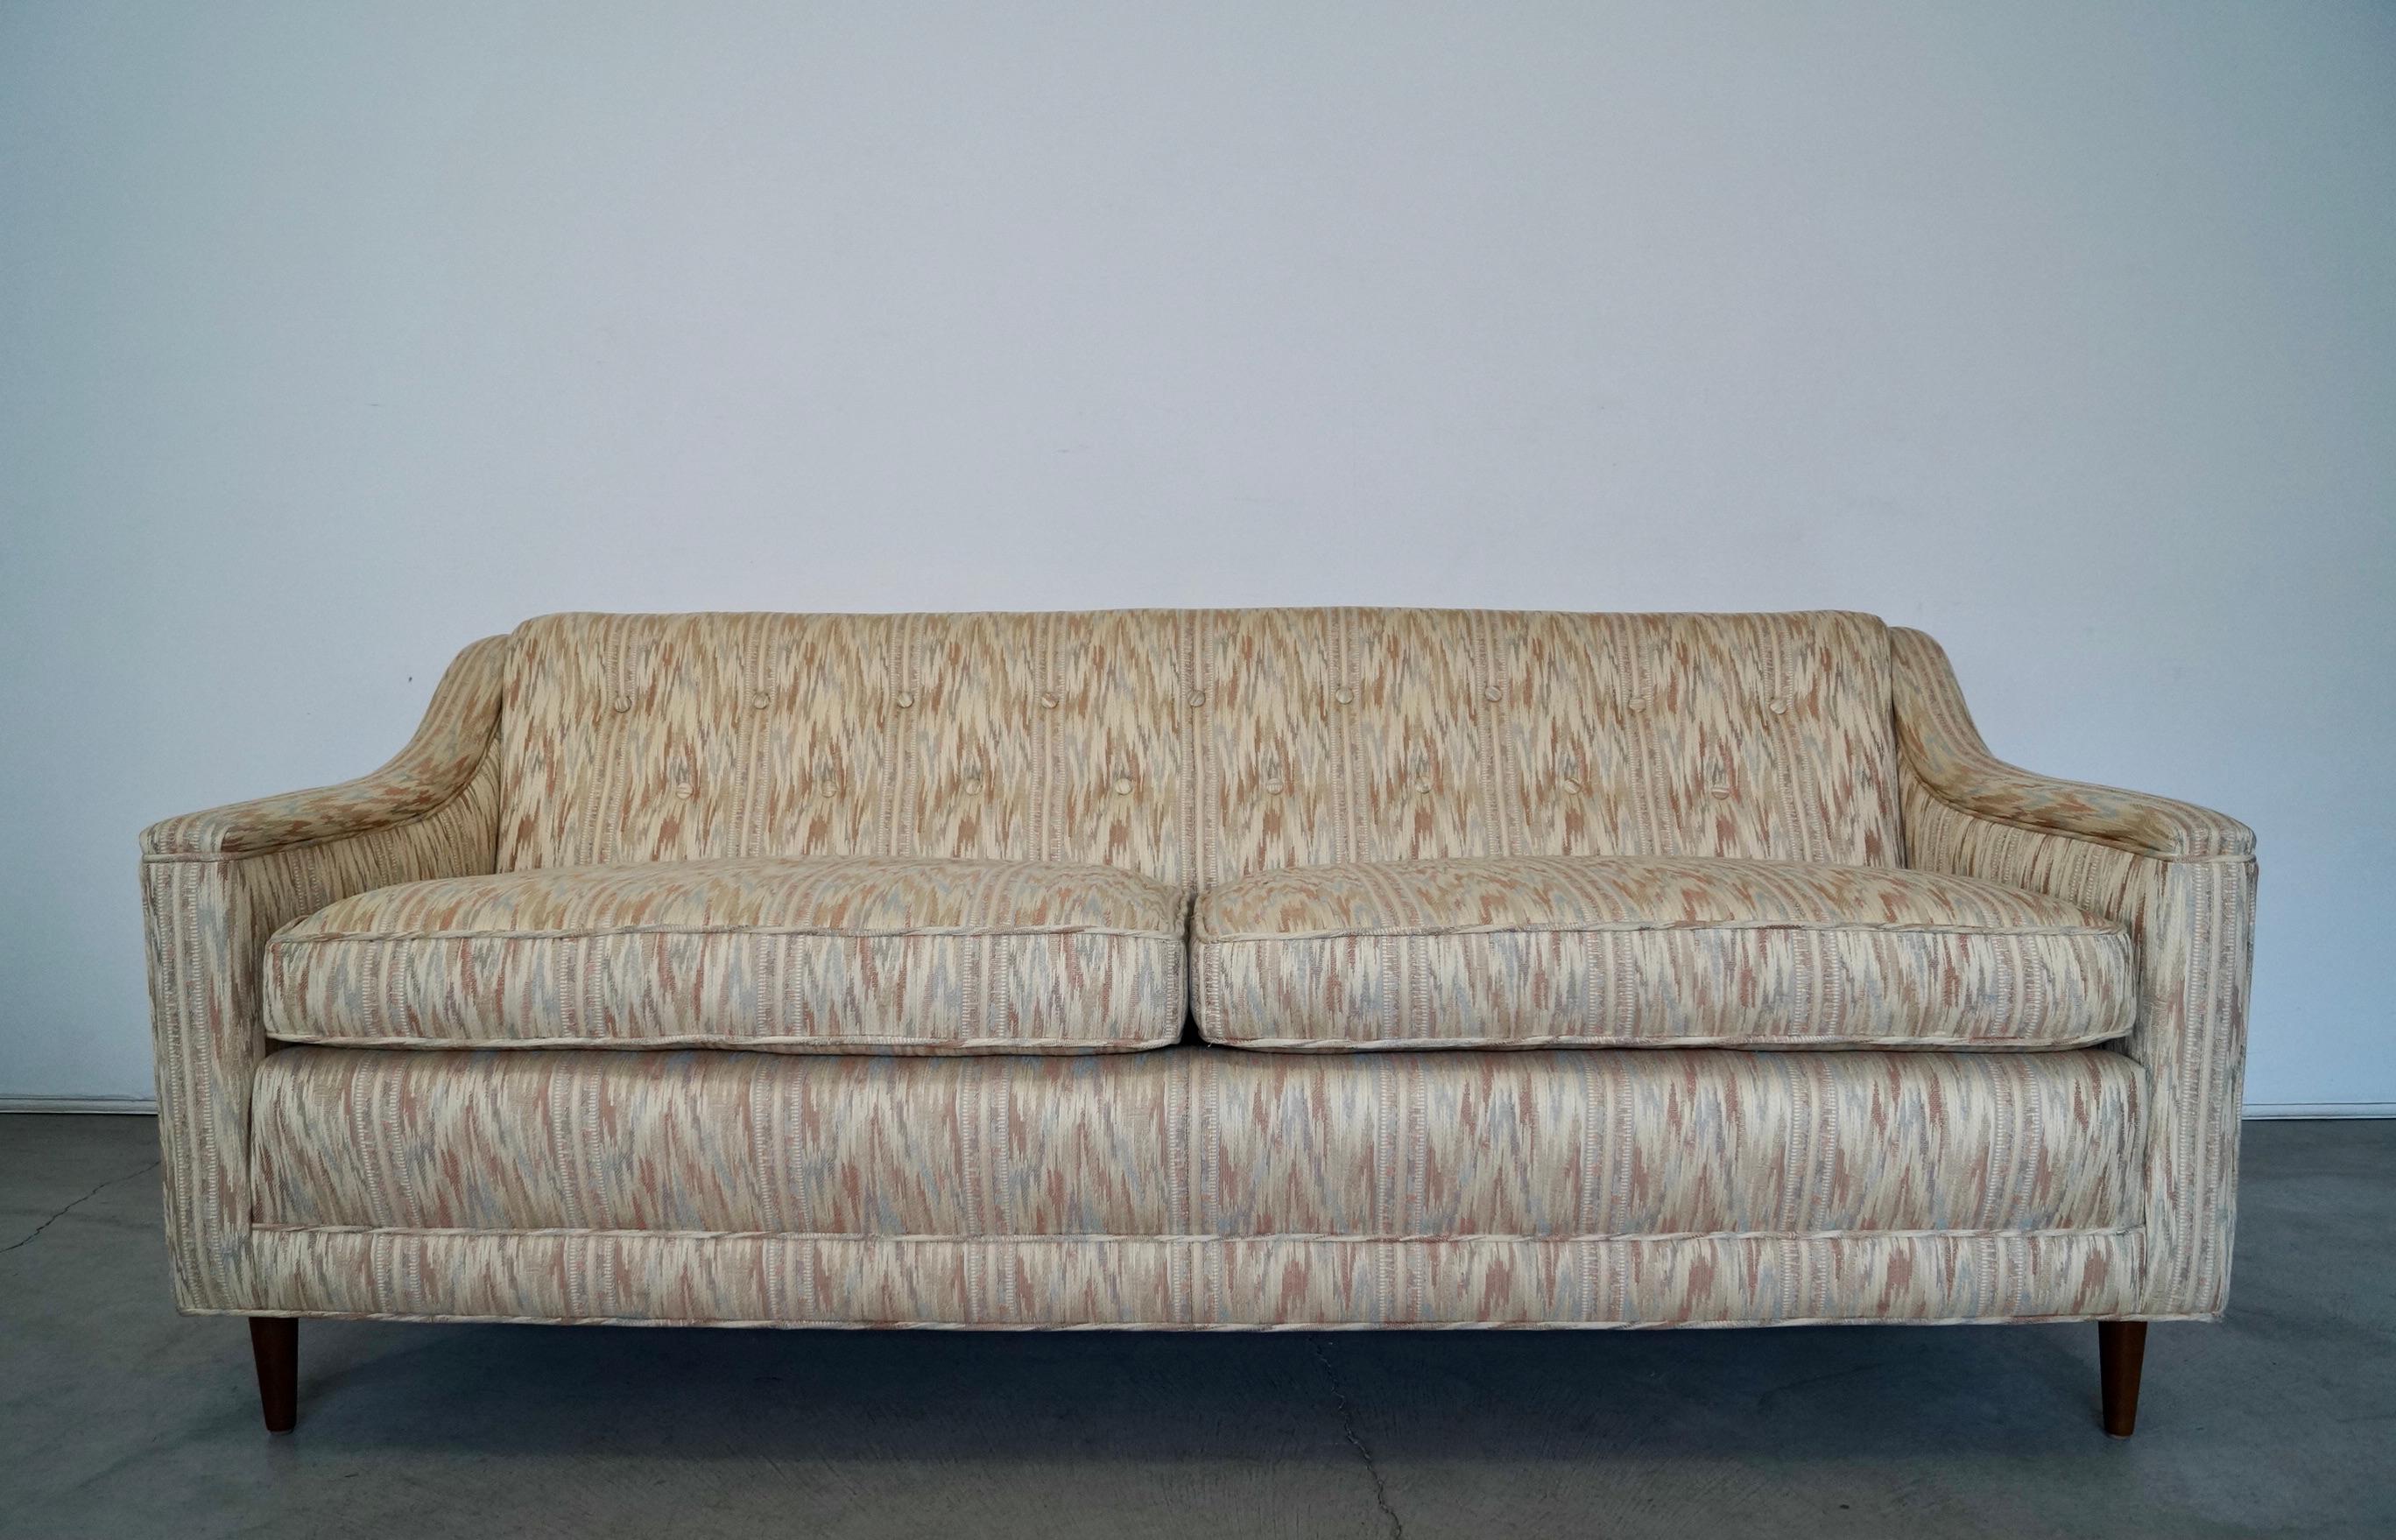 Vintage Mid-Century Modern couch for sale. It's from the 1960's, and is flawless. It's really solid and well made, and has coil springs on the seat frame and springs on the backrest. It has arms that slope, and a buttoned-back. It's really